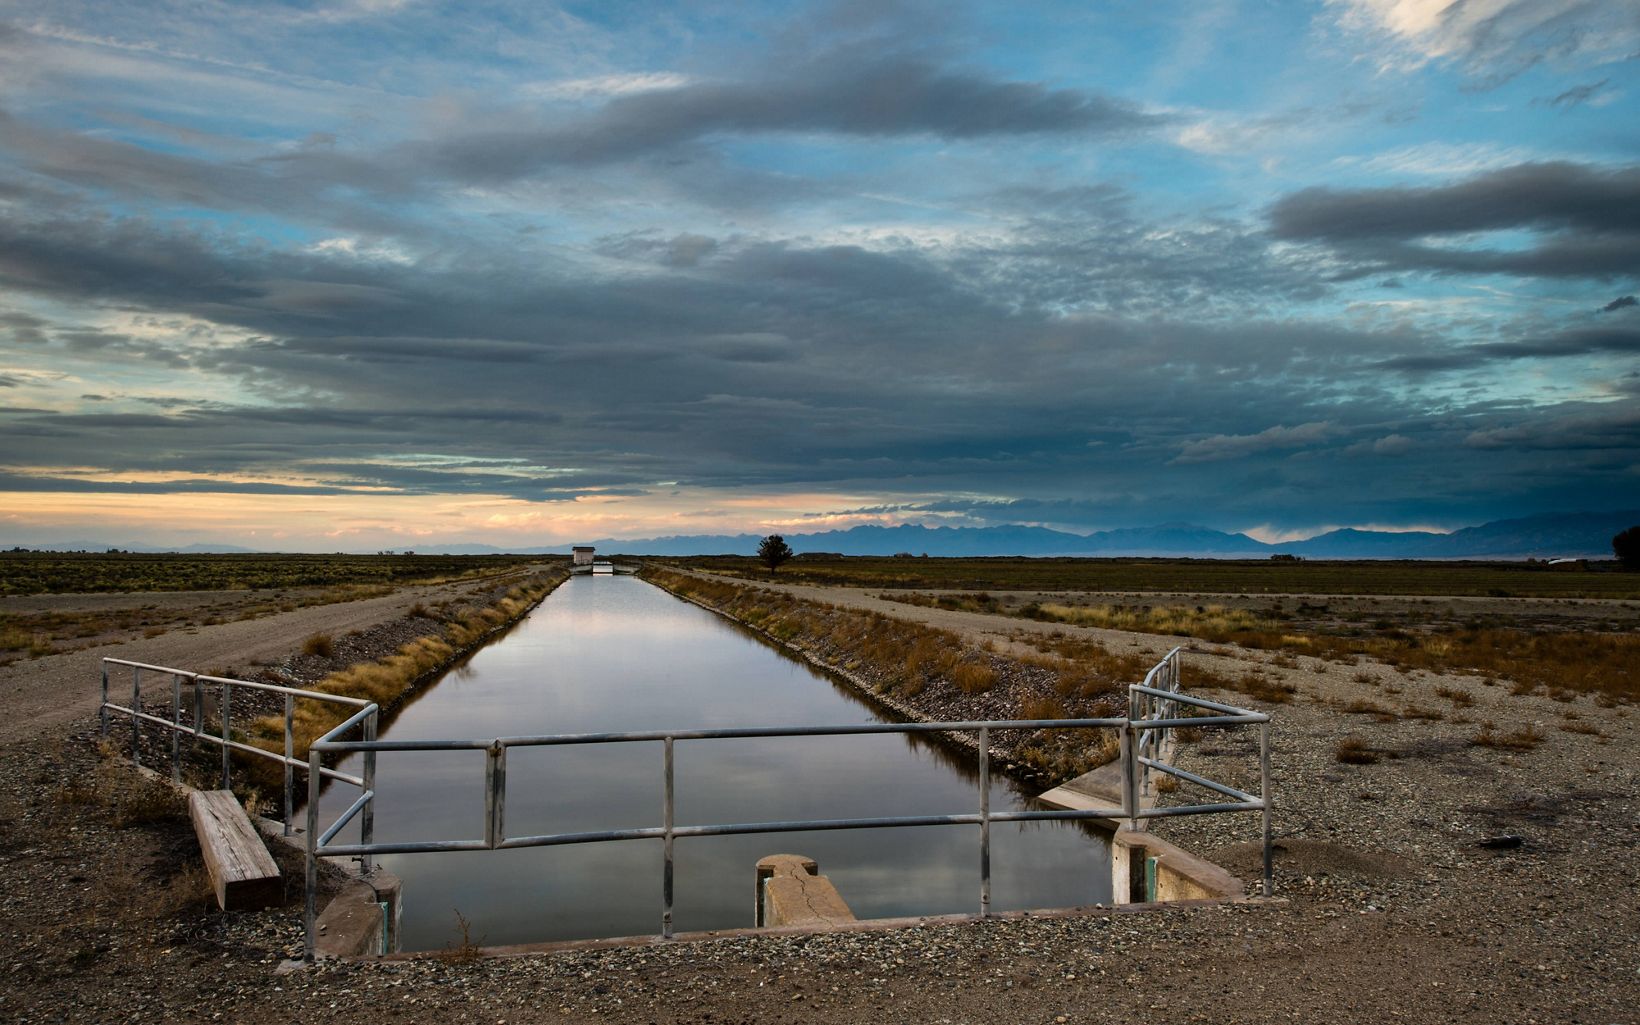 Irrigation channel stretching across the San Luis Valley in Colorado.